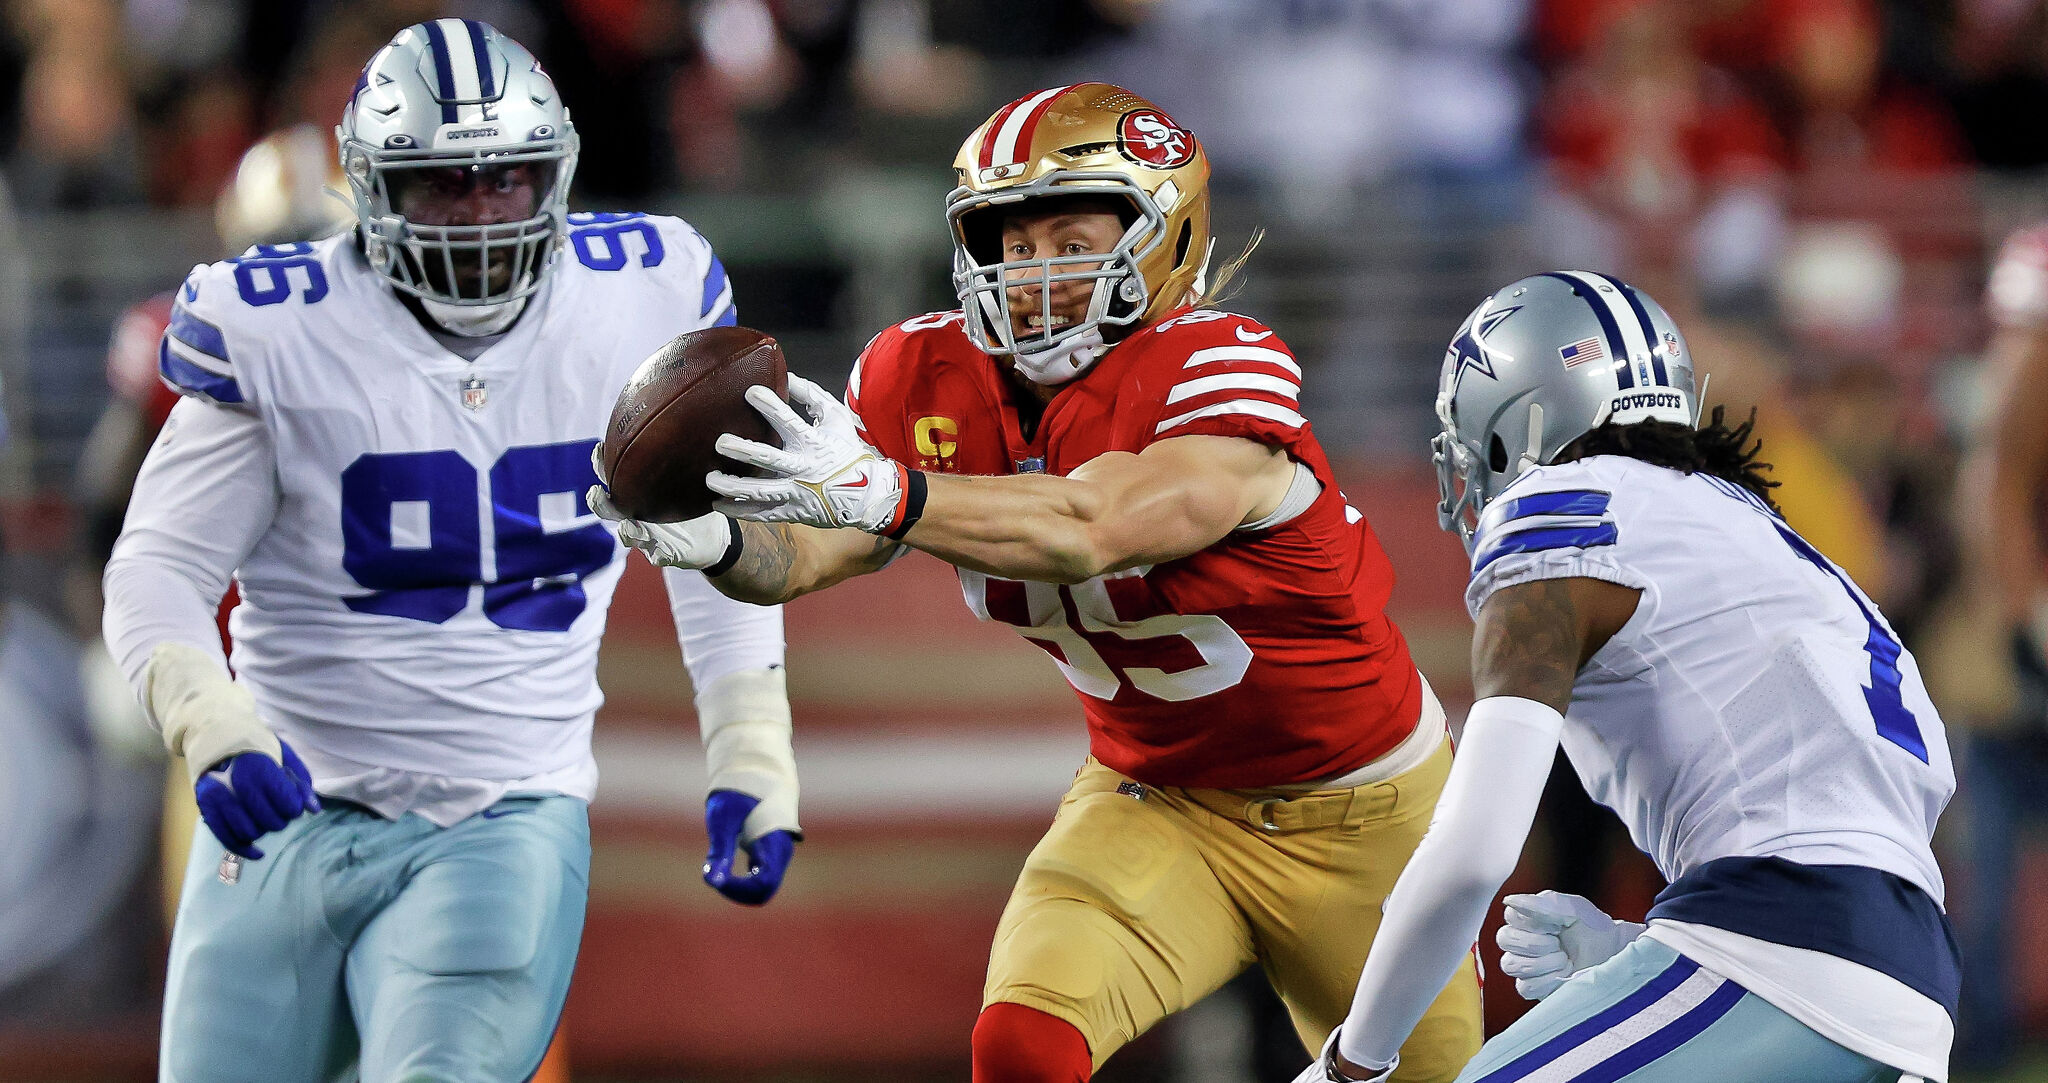 George Kittle sparks San Francisco 49ers with circus catch